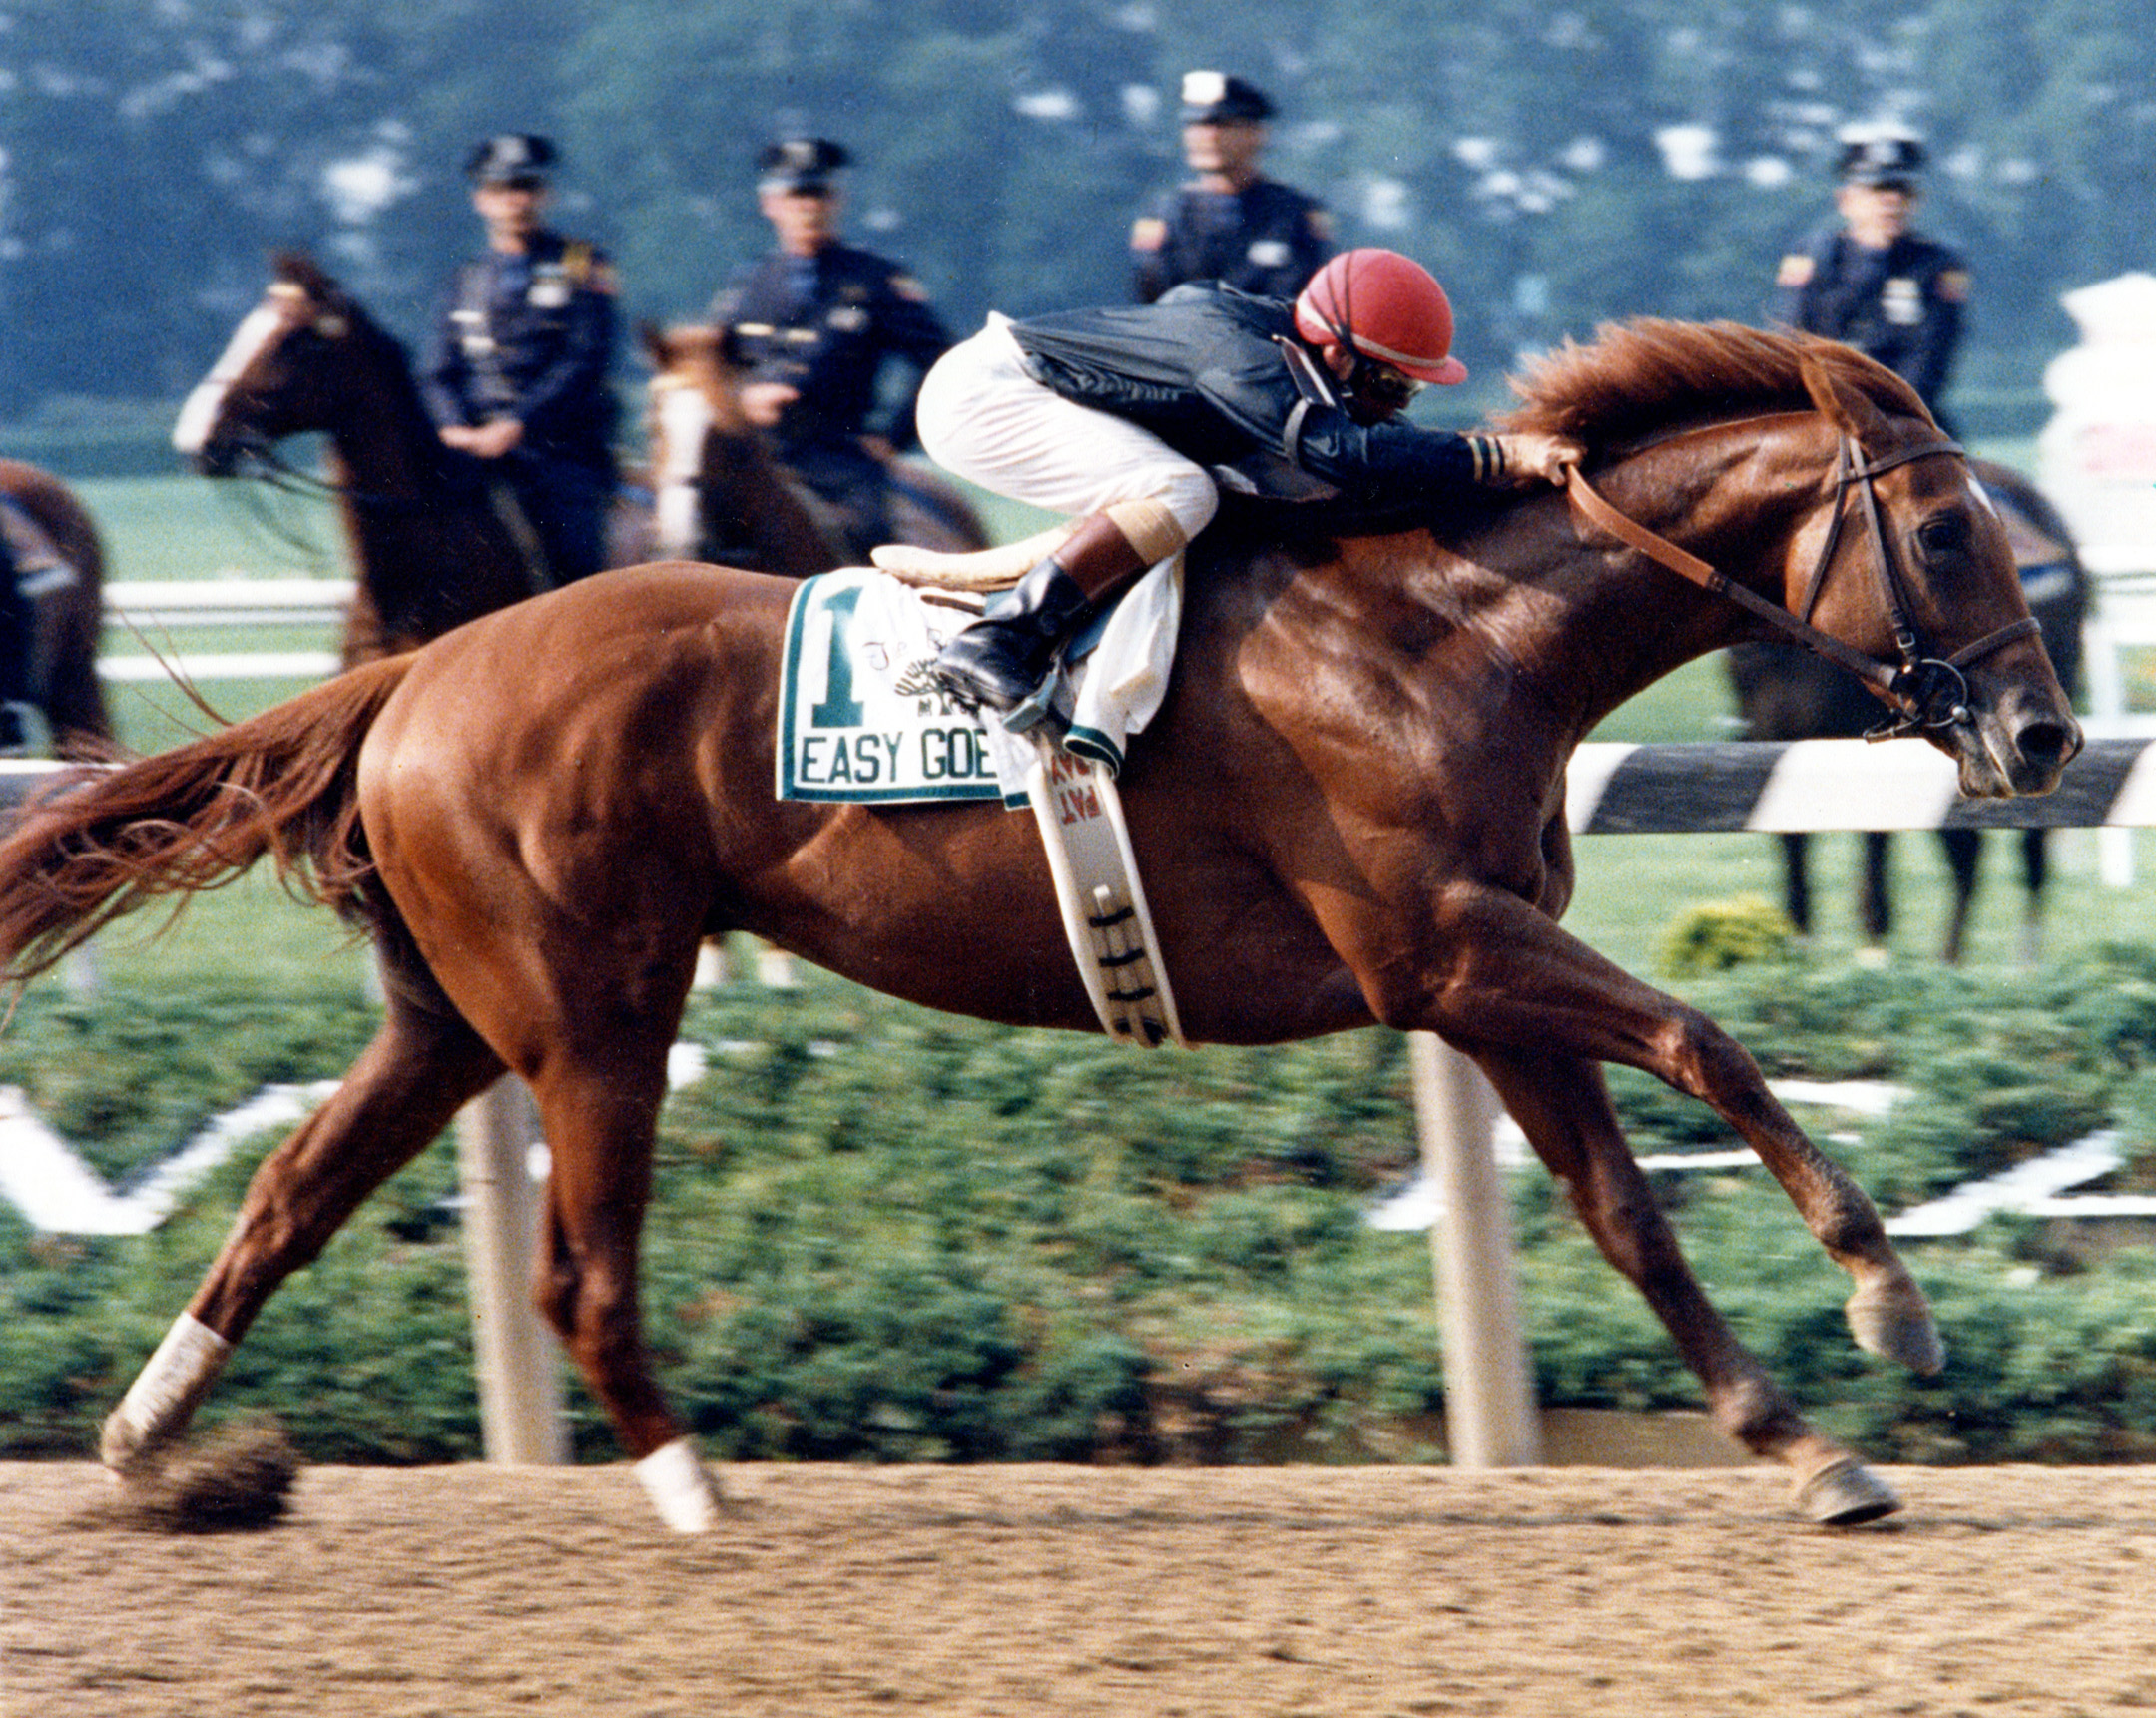 Easy Goer (Pat Day up) winning the 1989 Belmont Stakes (NYRA/Bob Coglianese /Museum Collection)